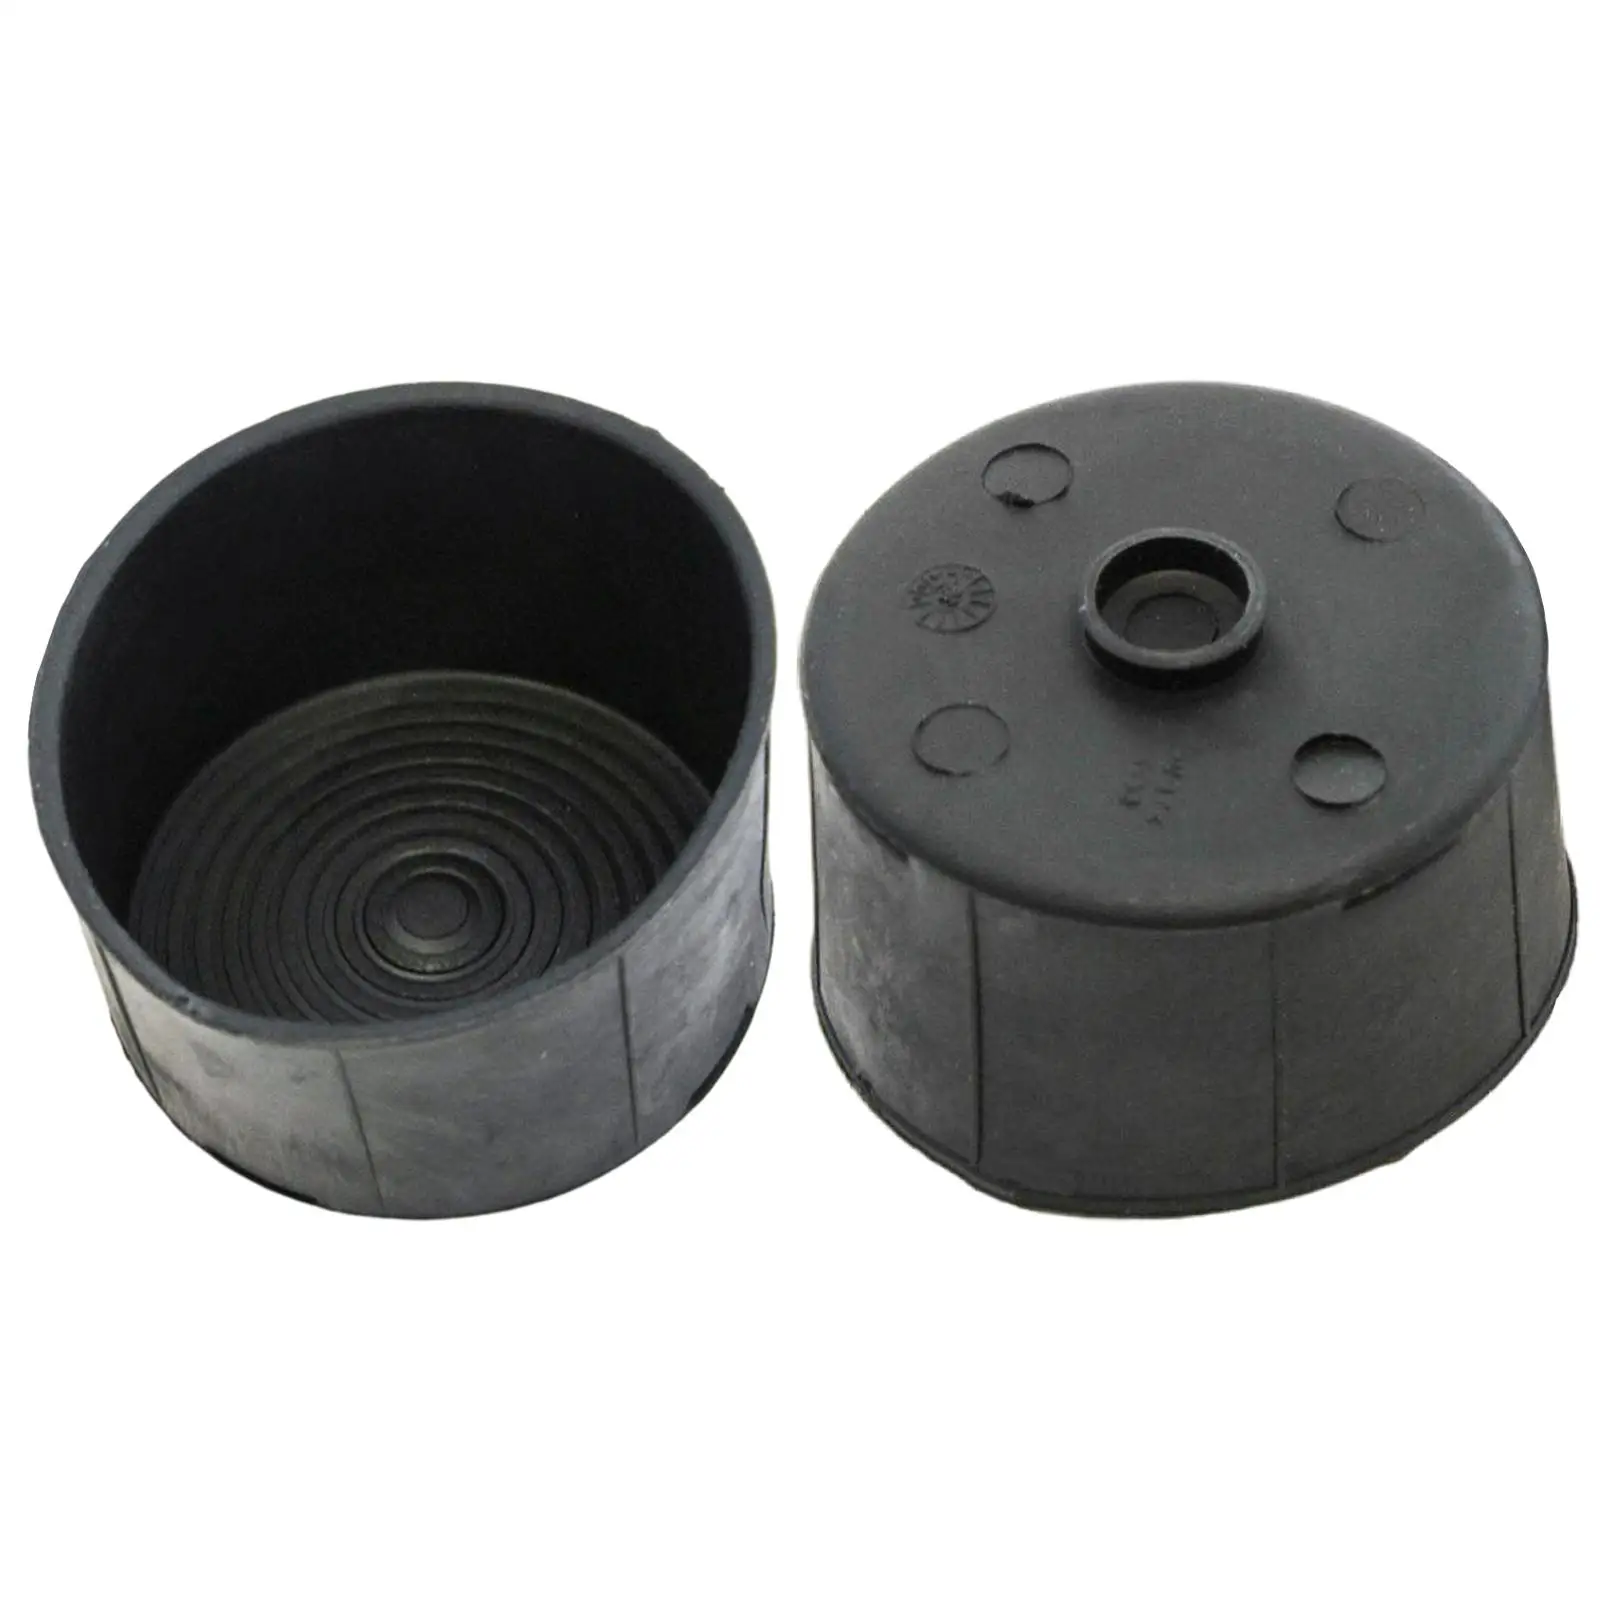 2 Count Rubber Cup Holder Insert 1EB17DX9Ab for  RAM 1500 2009-16